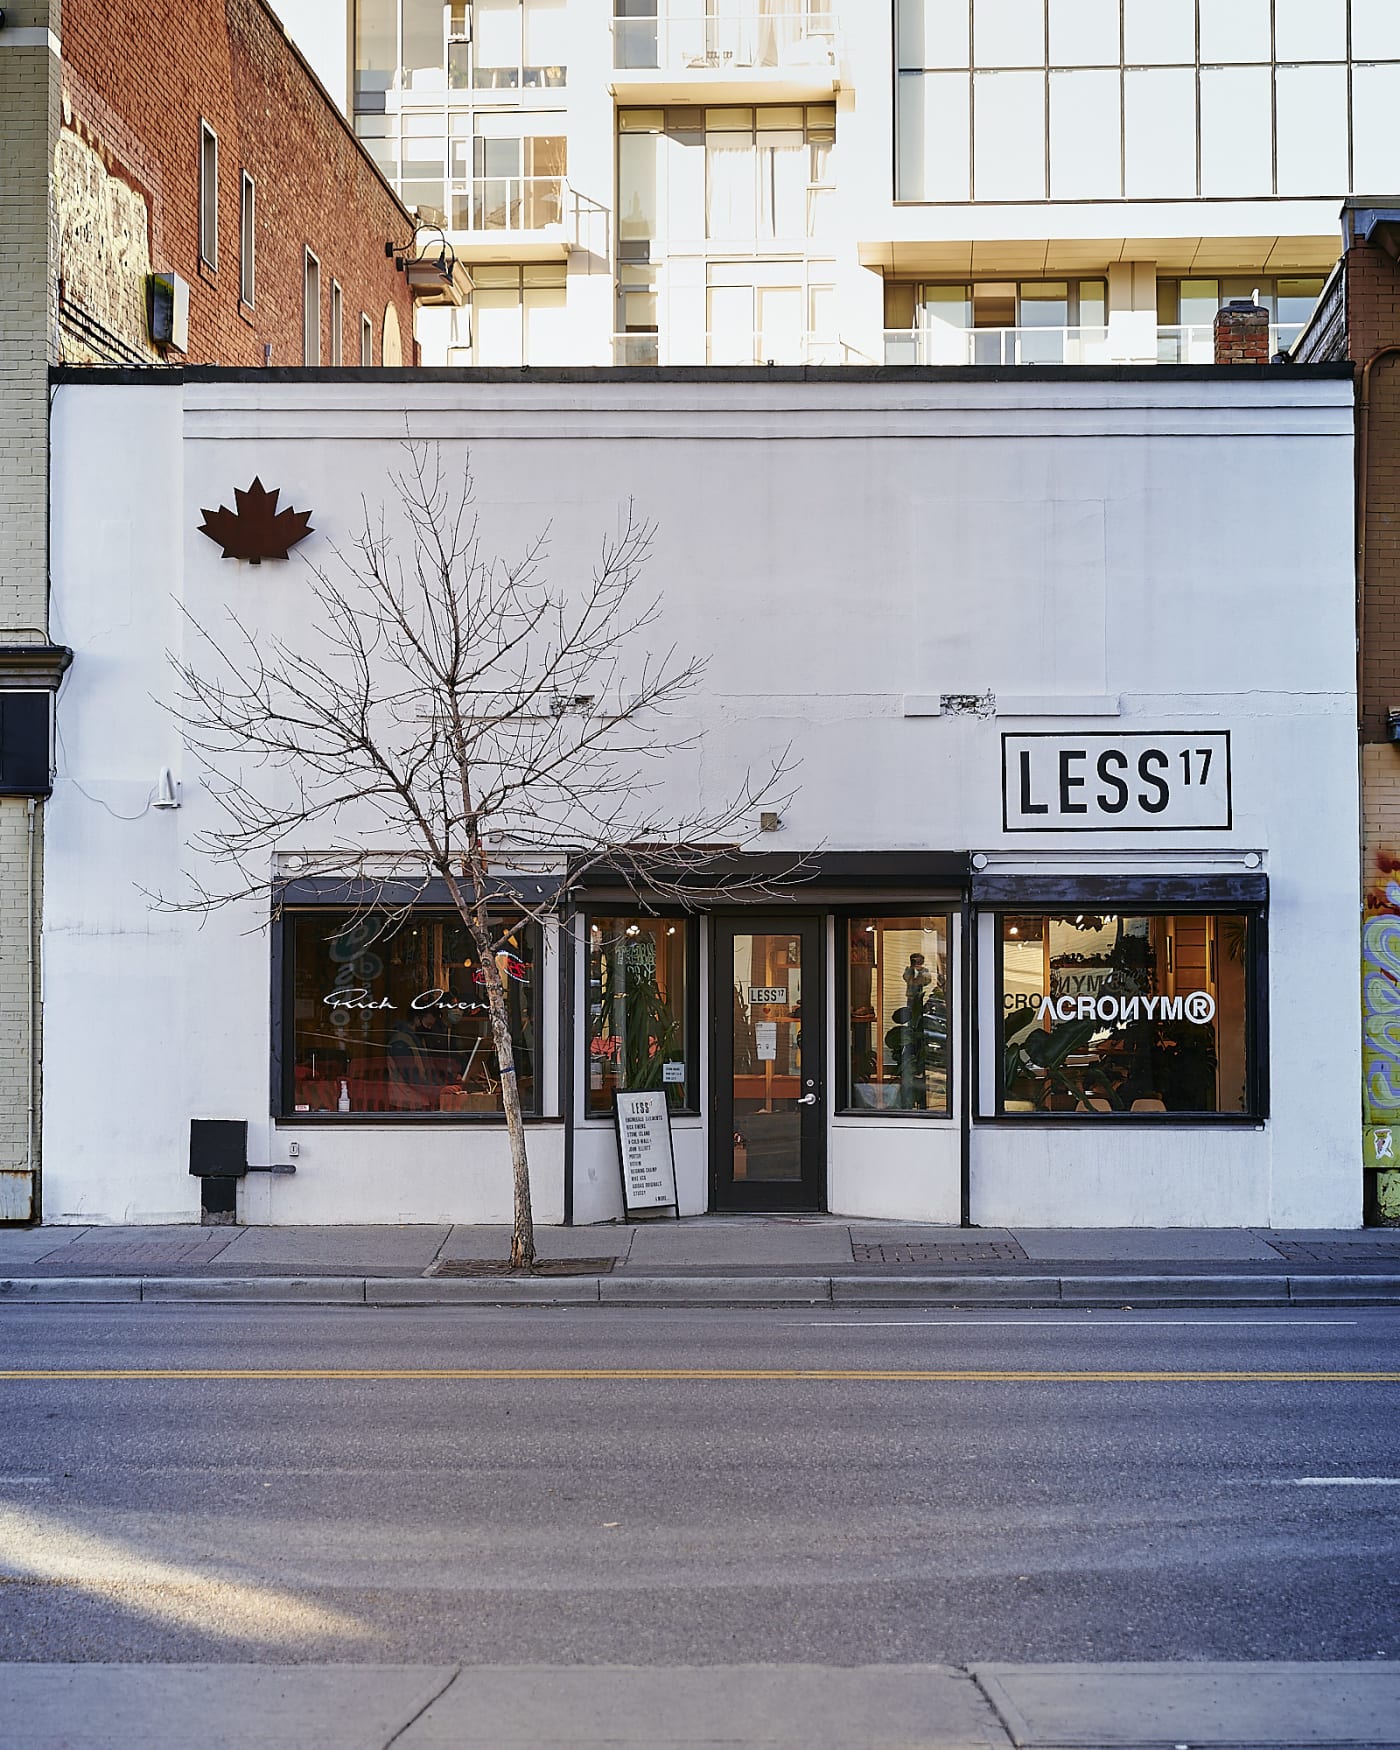 The outside of Less 17 from across a street